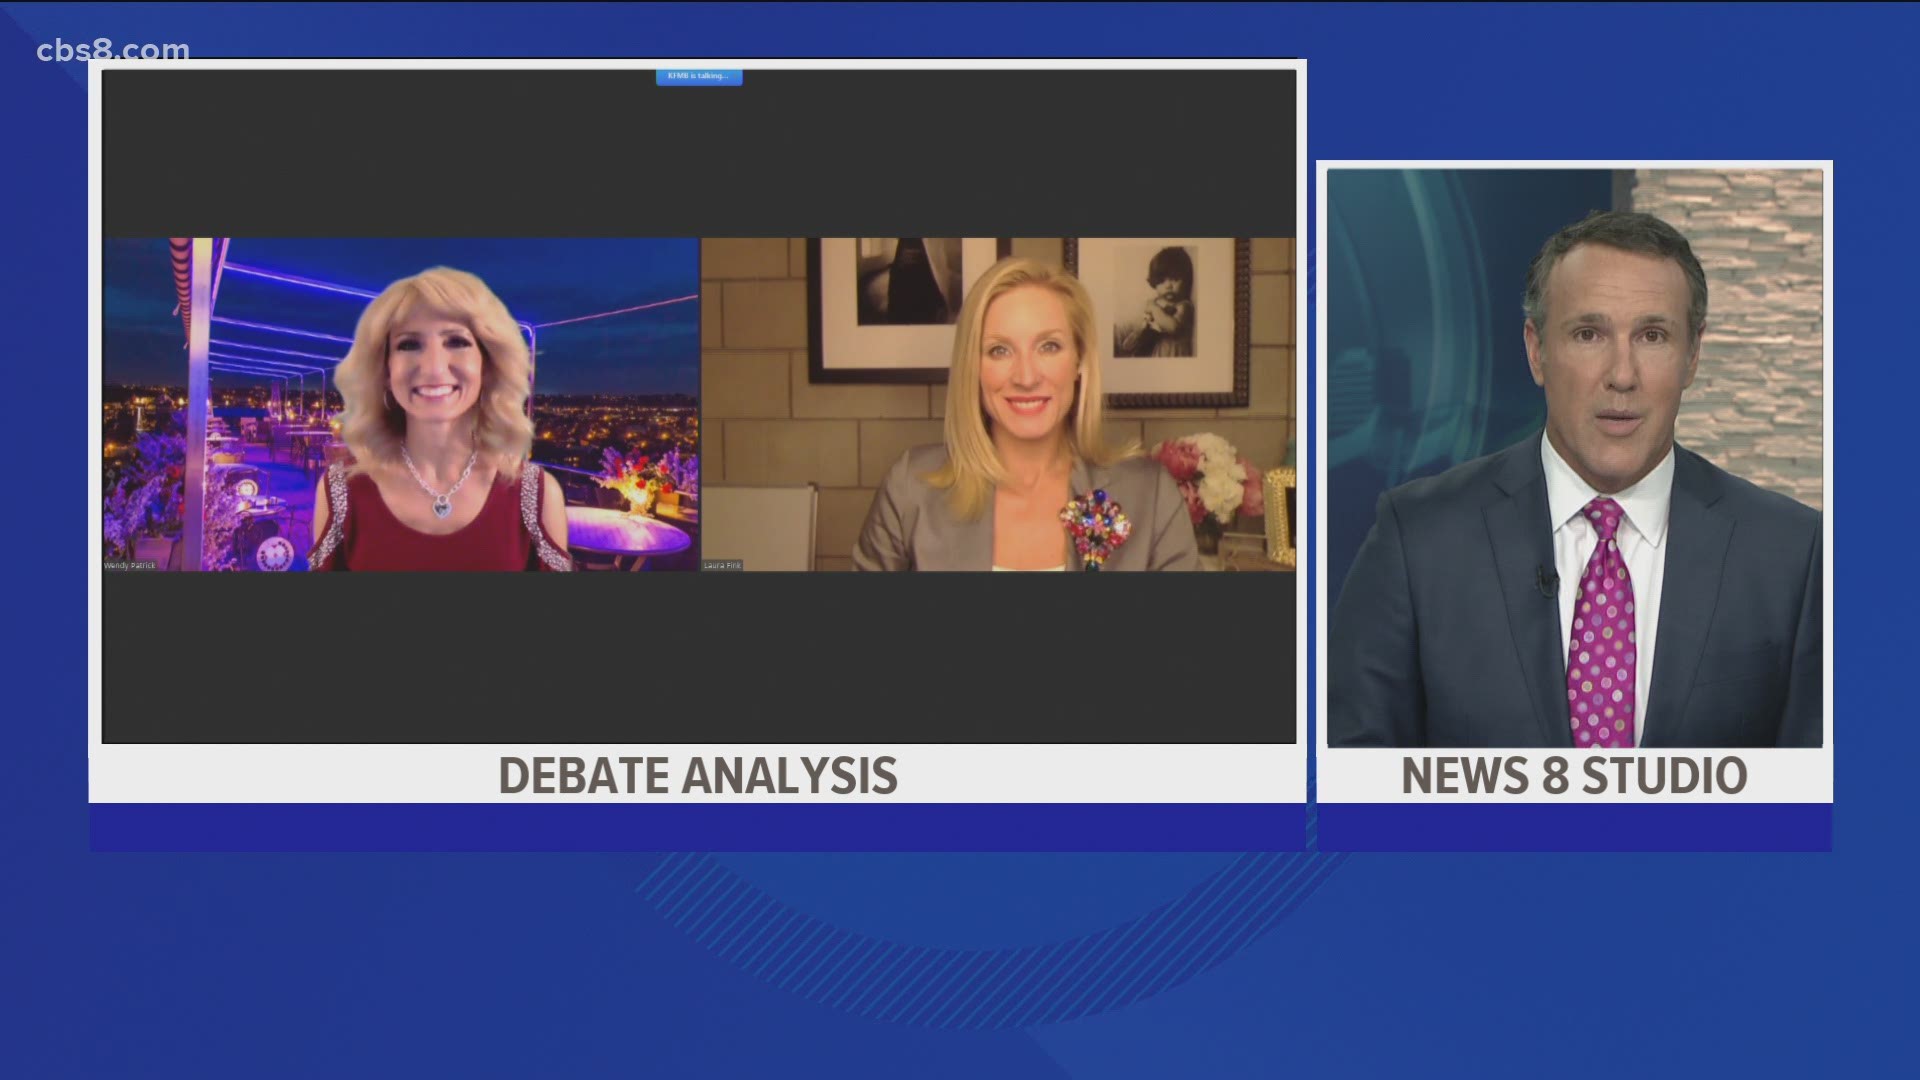 Laura Fink and Wendy Patrick spoke with News 8 about the Trump-Biden debate and who they think made a stronger case for the presidency.